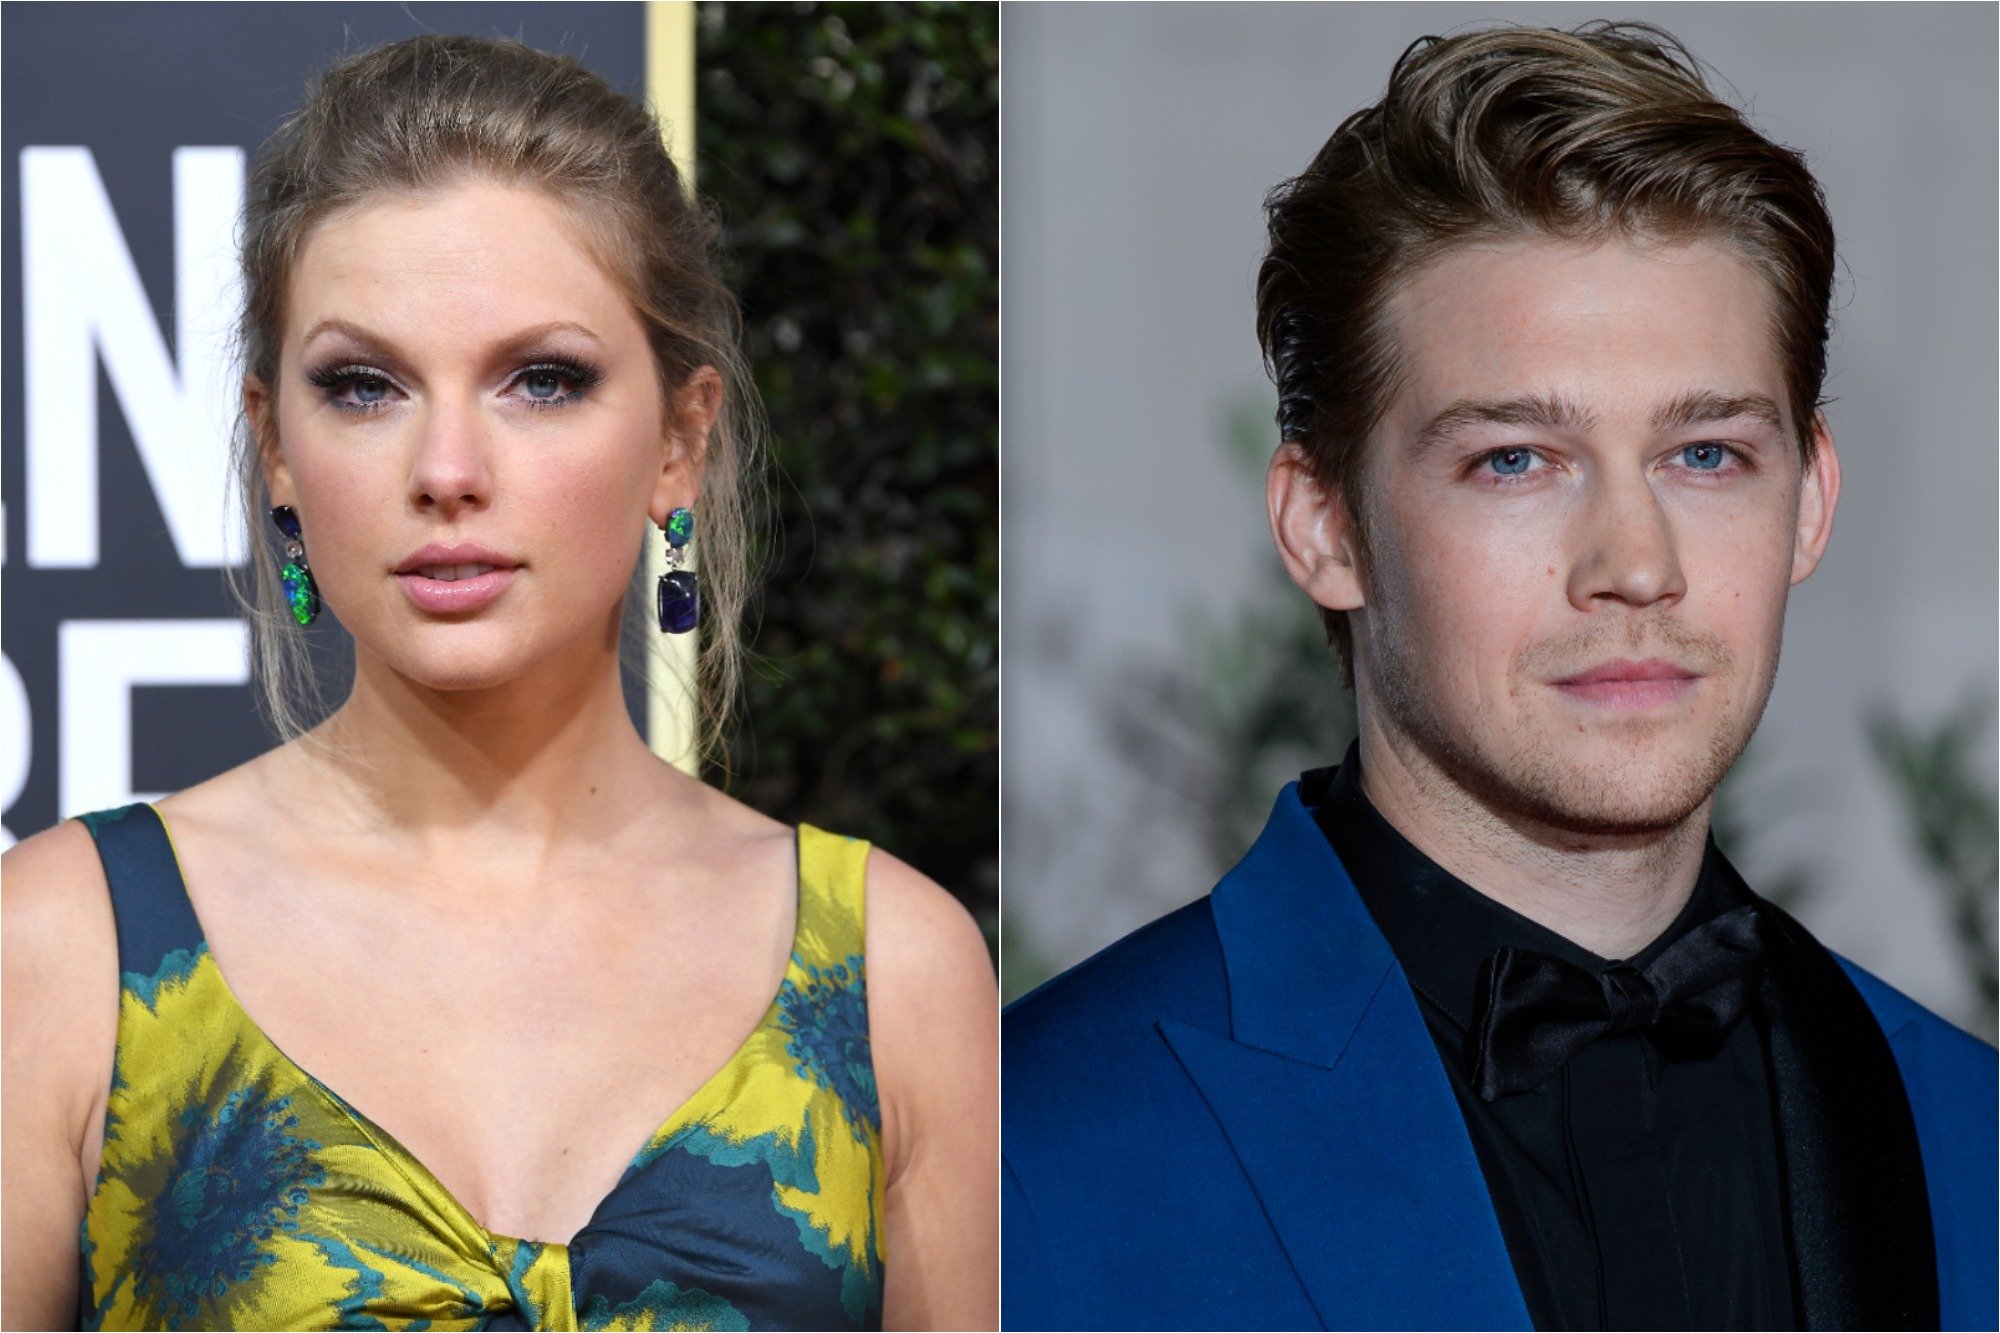 (R) Taylor Swift at the 77th Annual Golden Globe Awards on January 05, 2020 / (L) Joe Alwyn at the EE British Academy Film Awards 2020 After Party on February 02, 2020